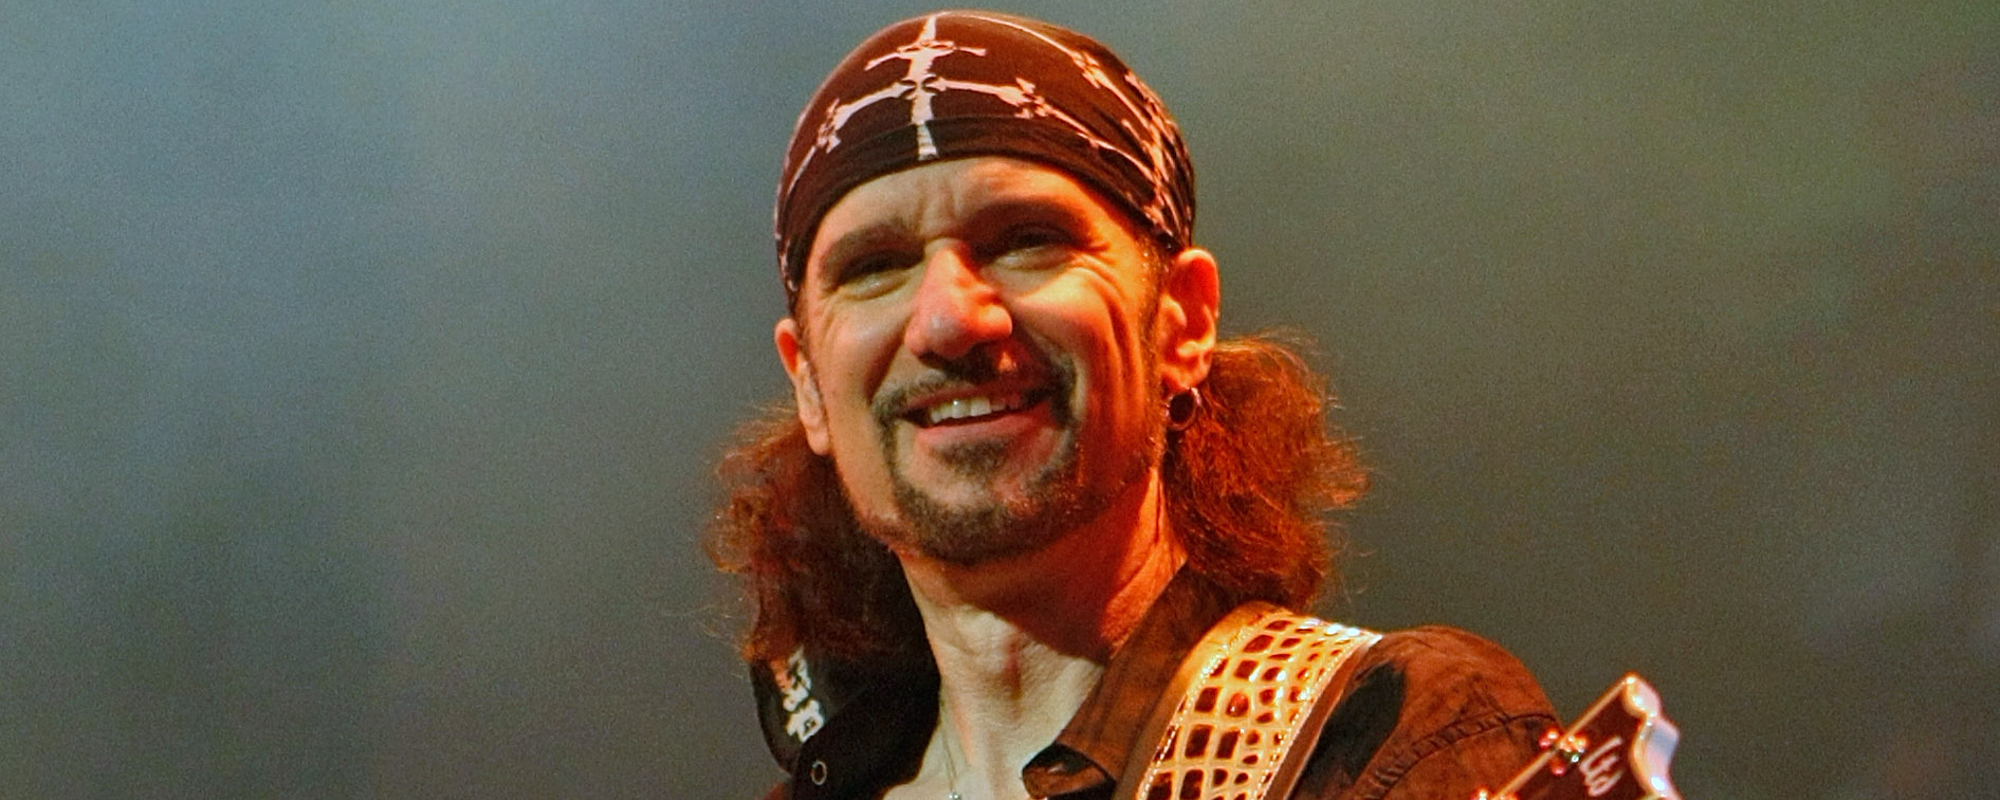 Former KISS Member Bruce Kulick Announces Departure from Grand Funk Railroad After 23 Years